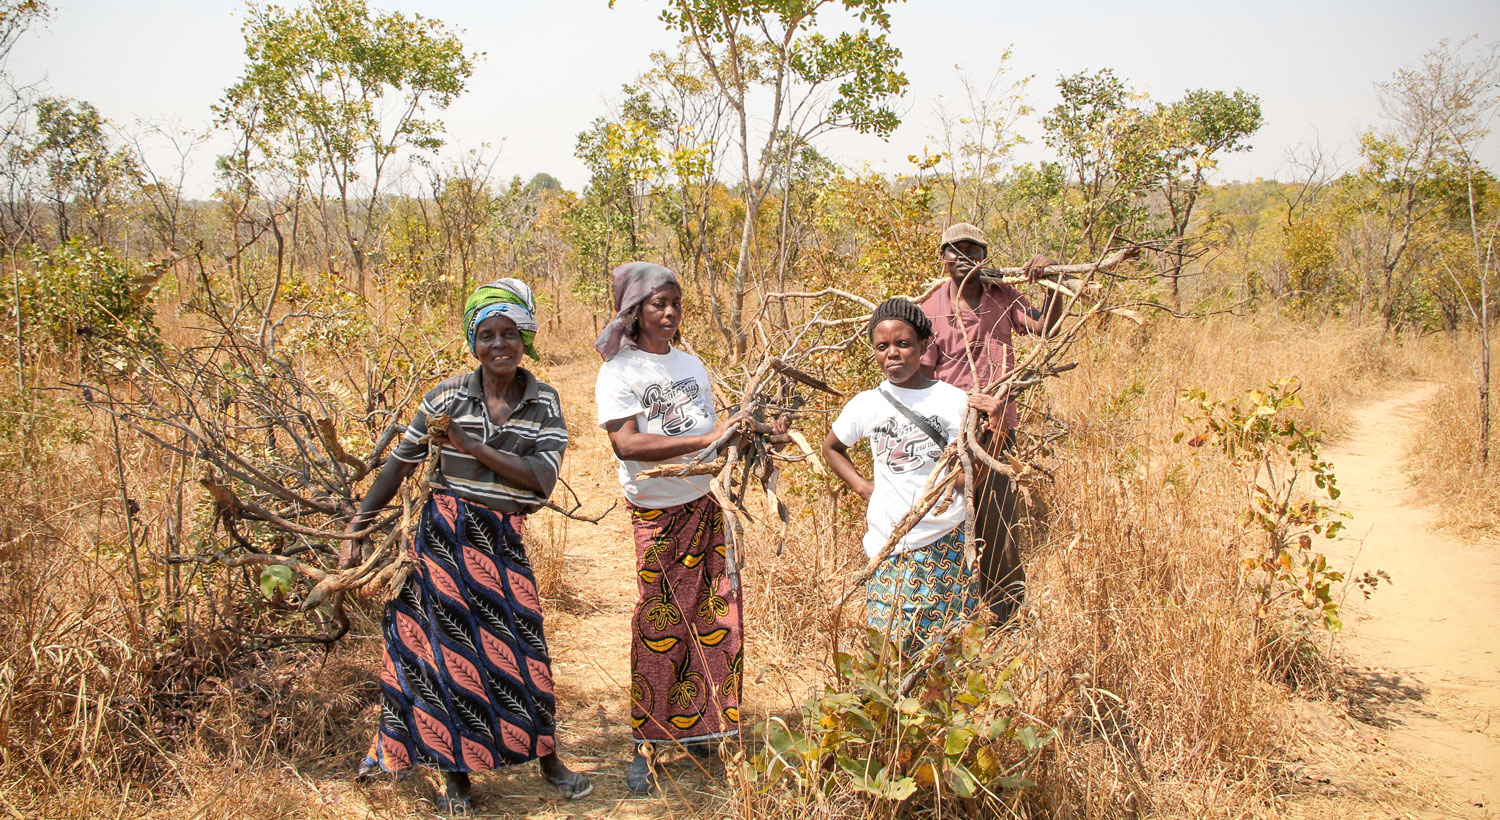  On a regular basis women from the community have to collect firewood in order to cook food for their families. 